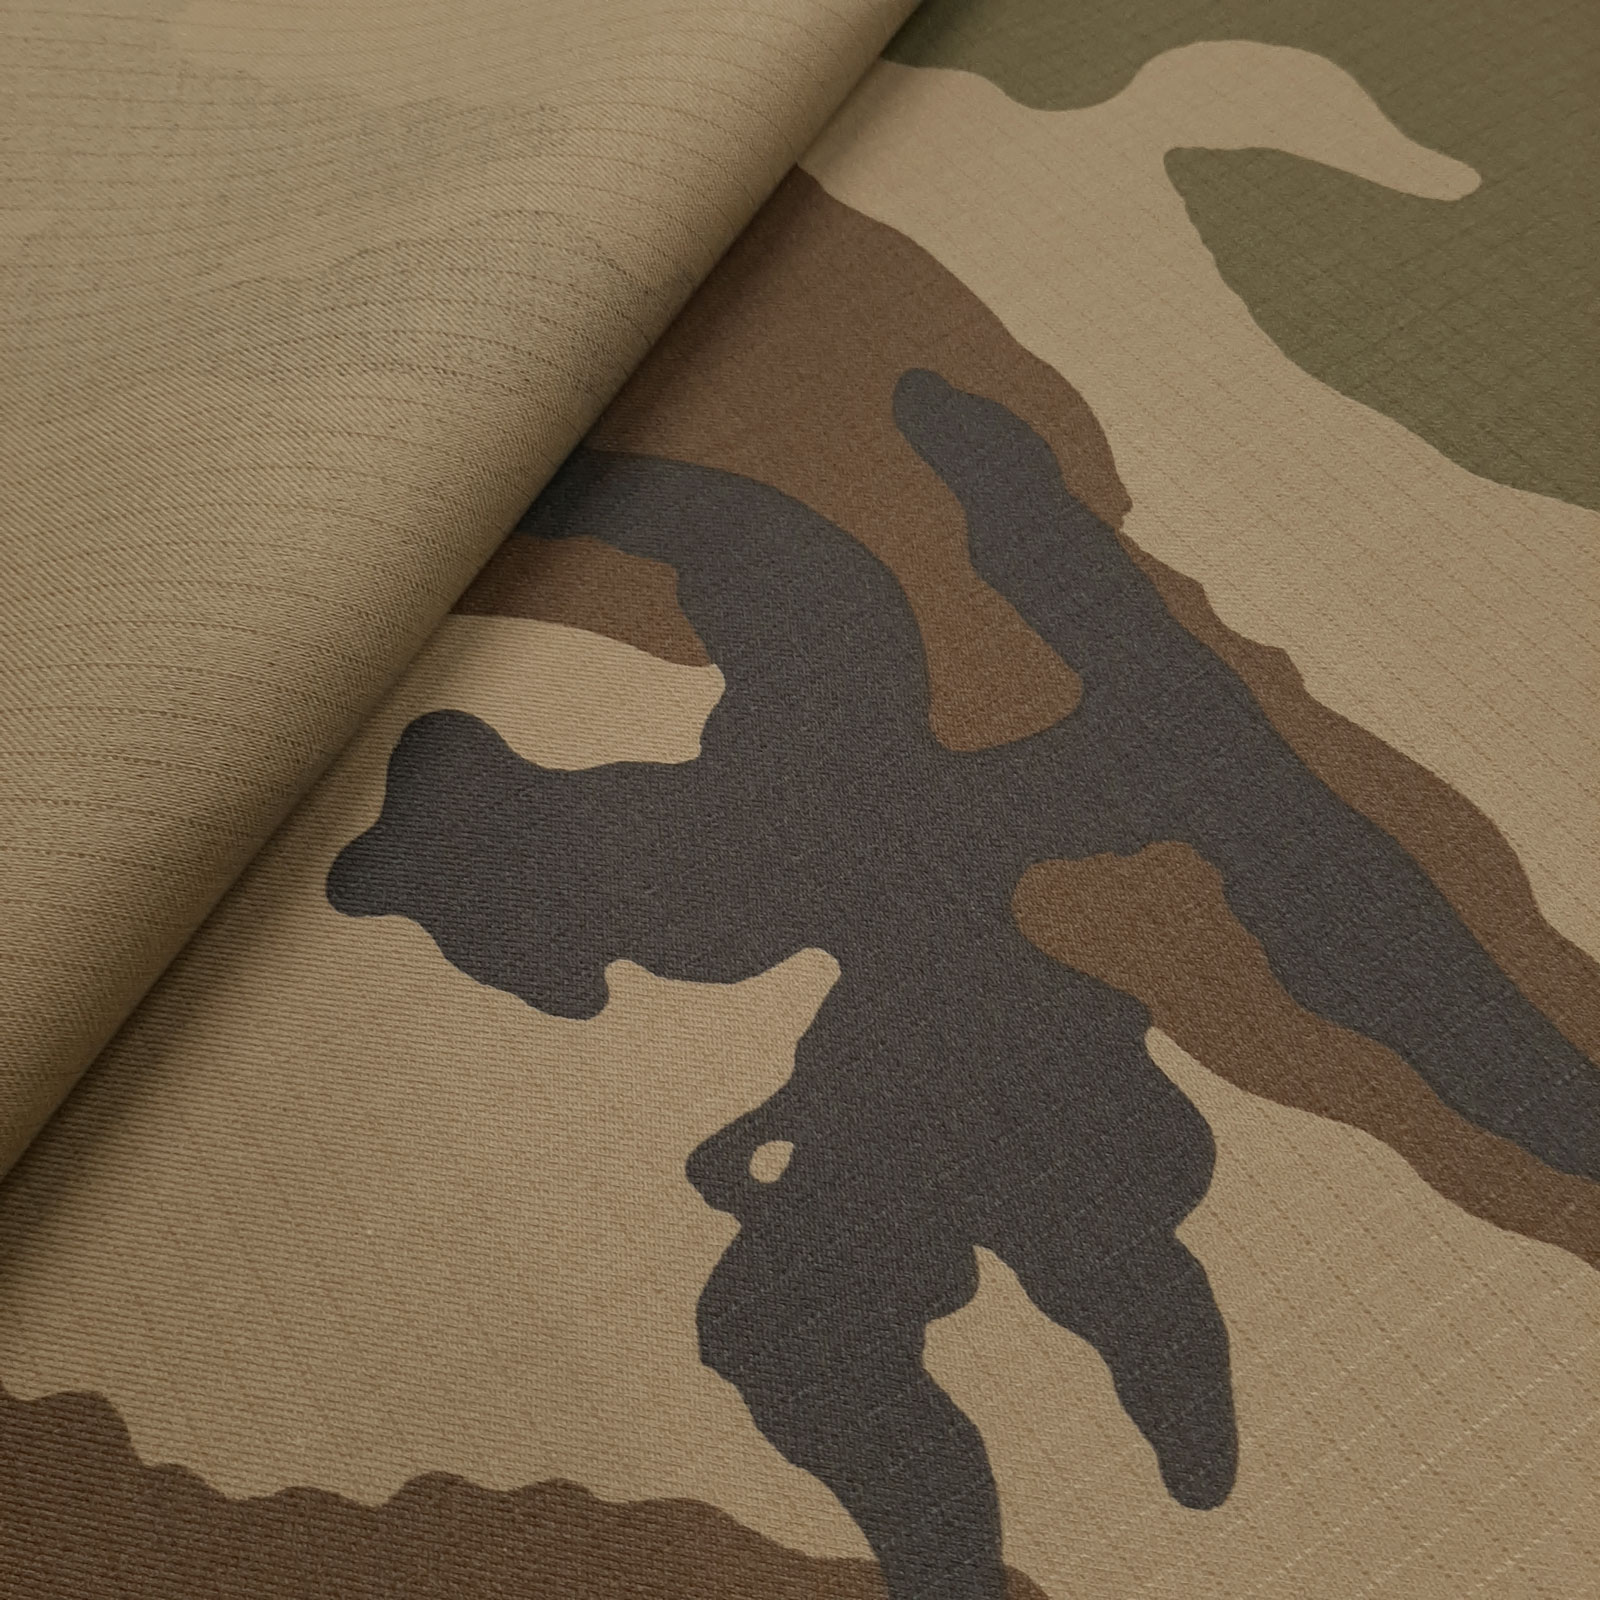 Aramid France Camouflage - Ripstop Camouflage Print med UPF 50+